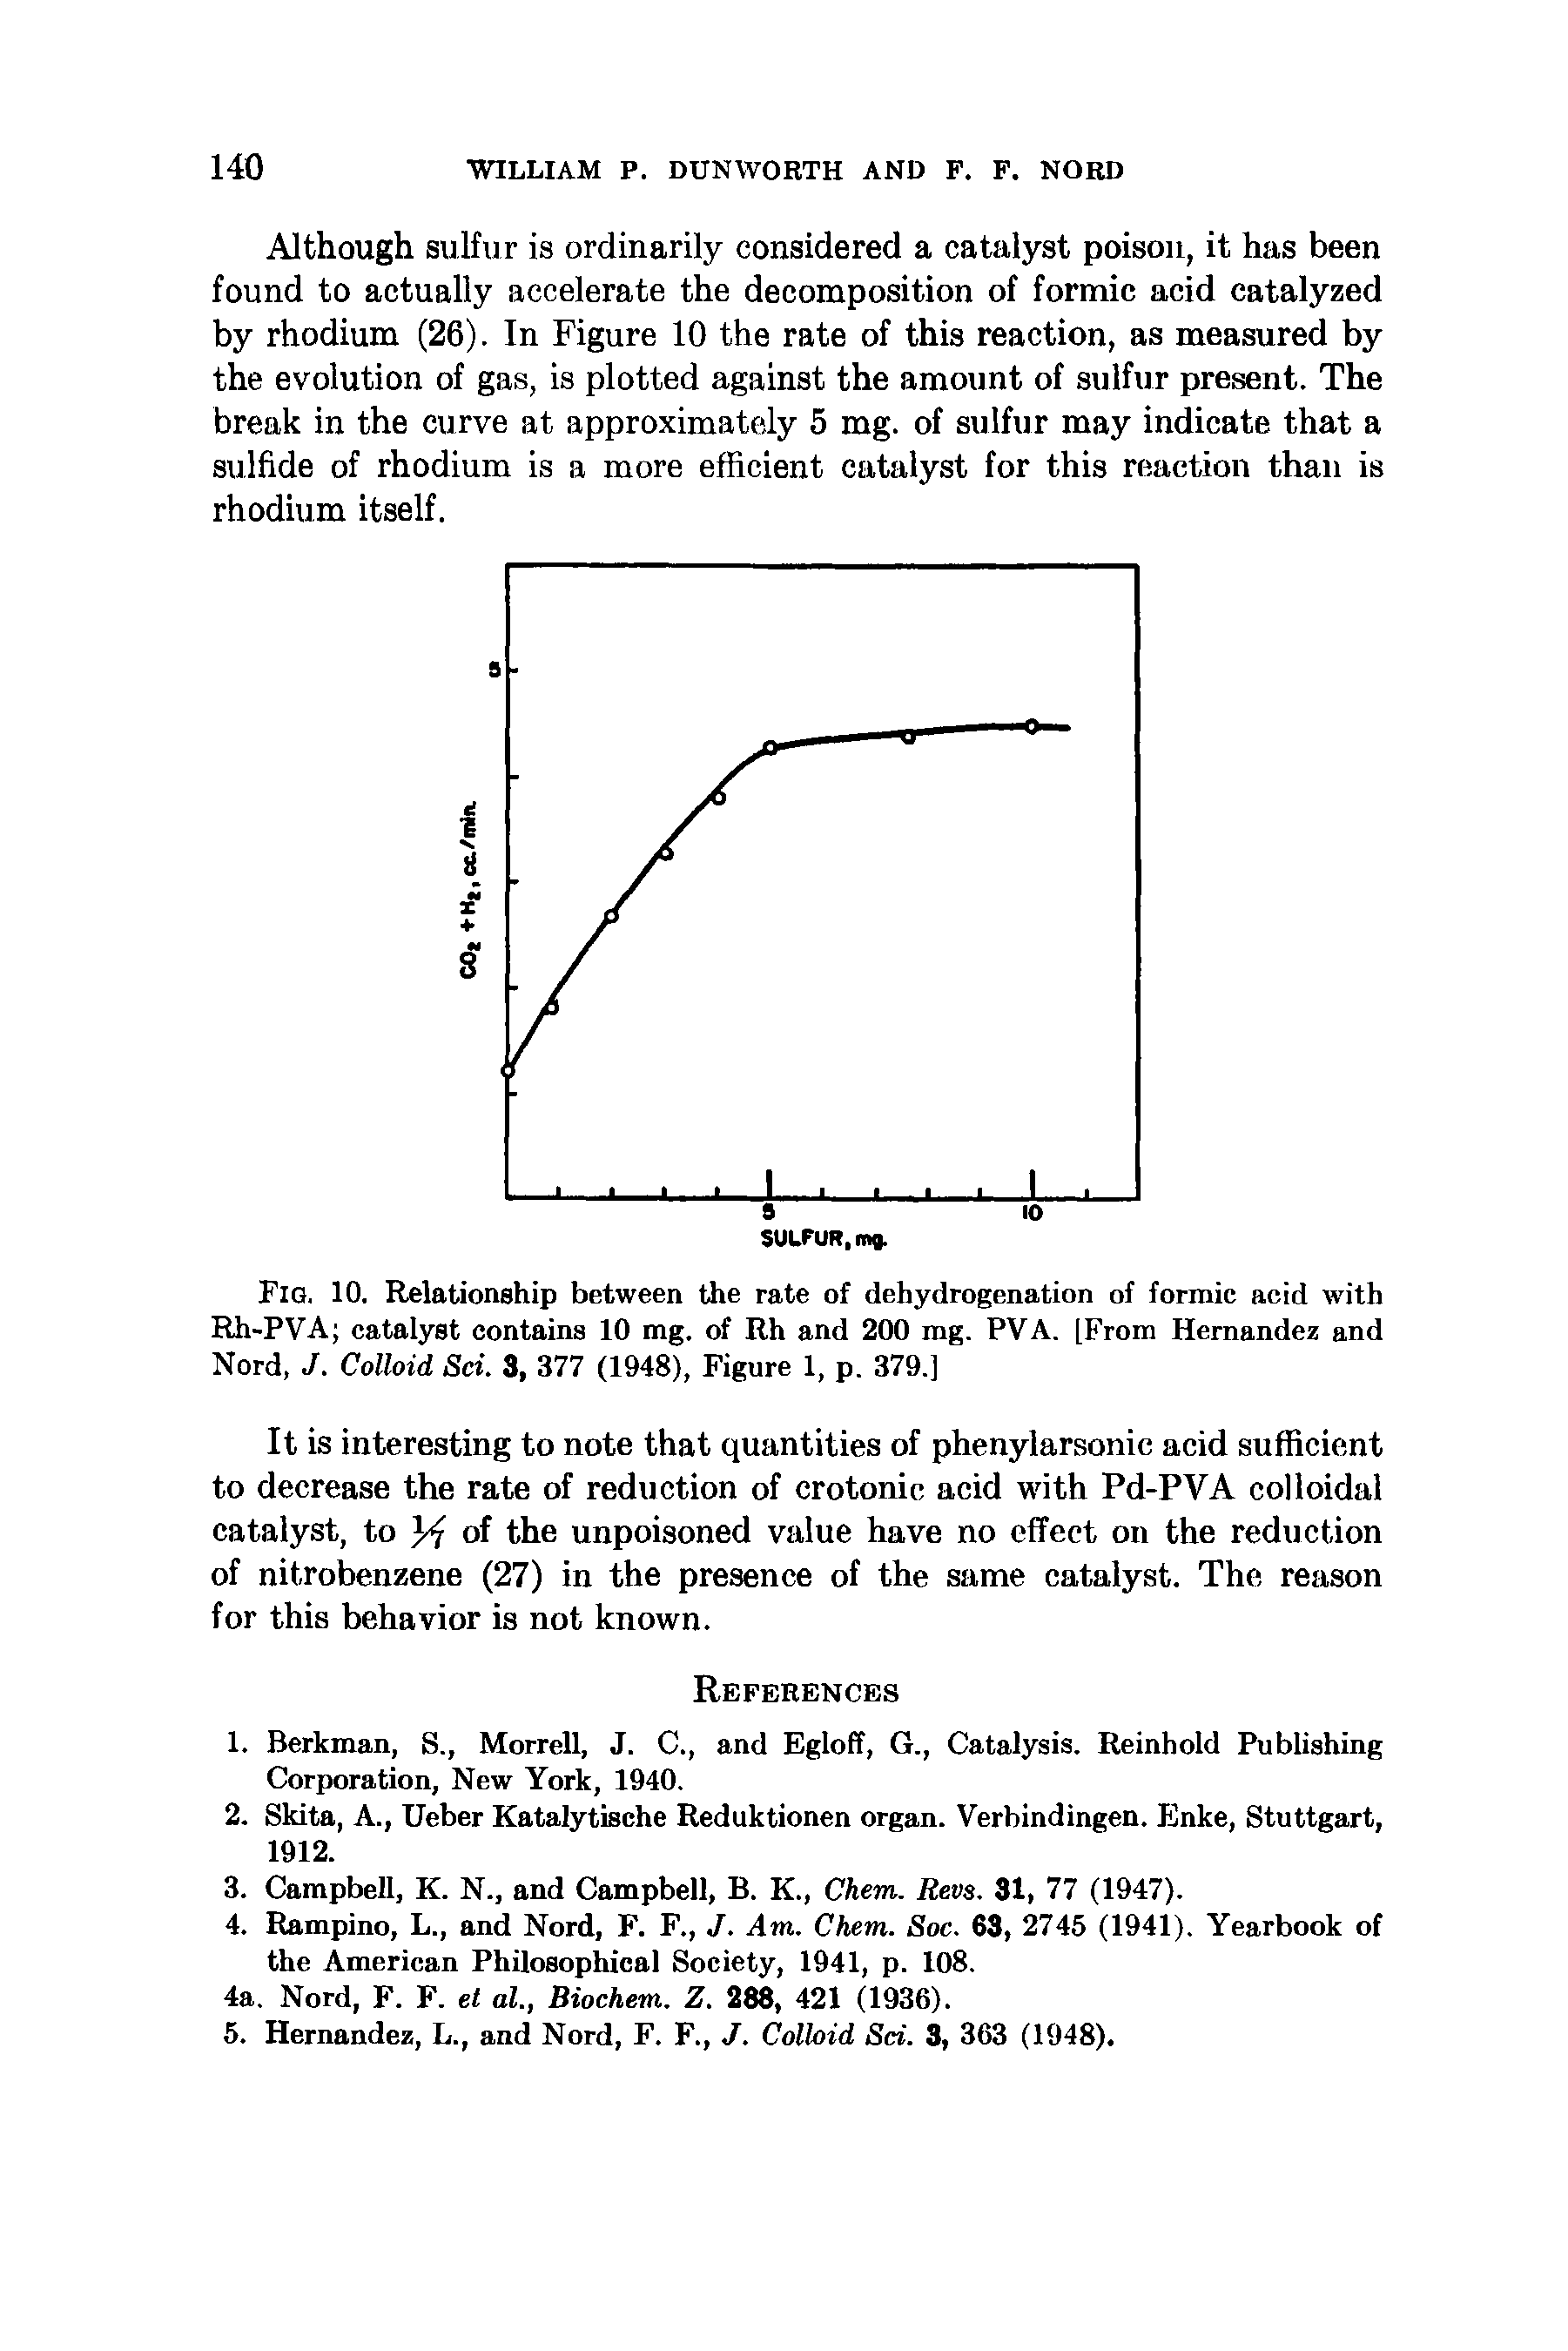 Fig. 10. Relationship between the rate of dehydrogenation of formic acid wdth Rh-PVA catalyst contains 10 mg. of Rh and 200 mg. PVA. [From Hernandez and Nord, J. Colloid Sci. 3, 377 (1948), Figure 1, p. 379.]...